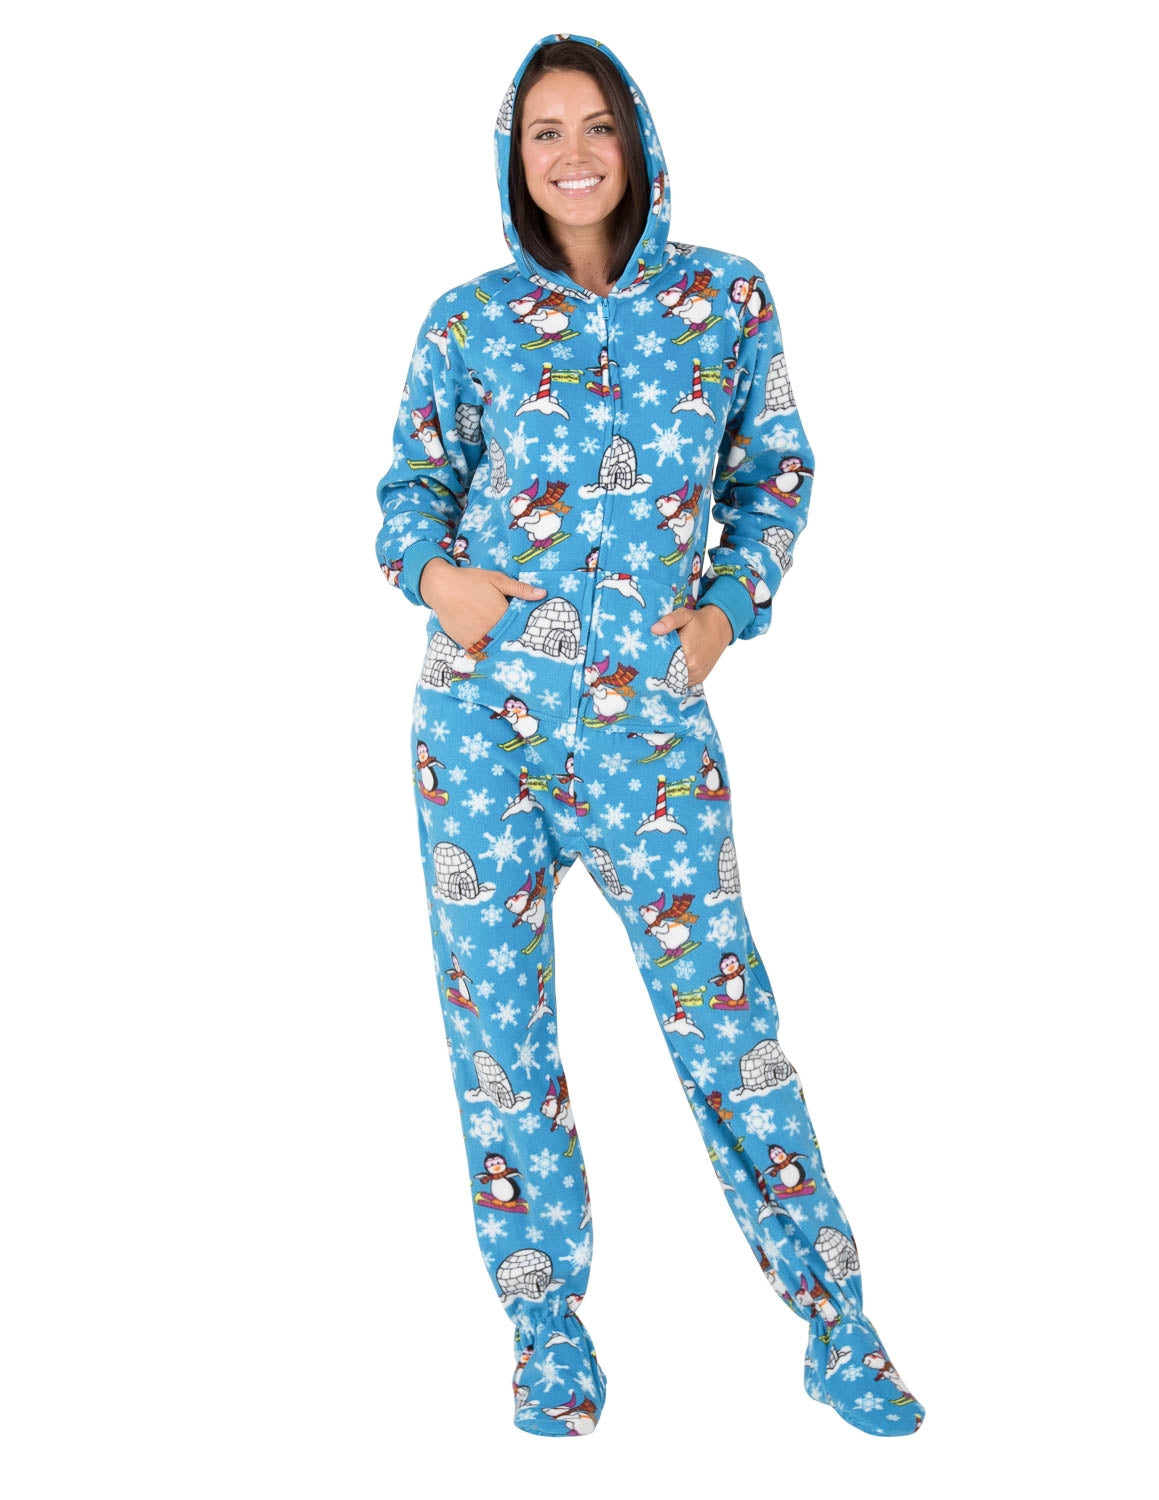 Footed Pajamas - Brilliant Blue Adult Hoodie Fleece Onesie - Adult - Small2X/Dbl Wide (Fits 5'3 - 5'6)